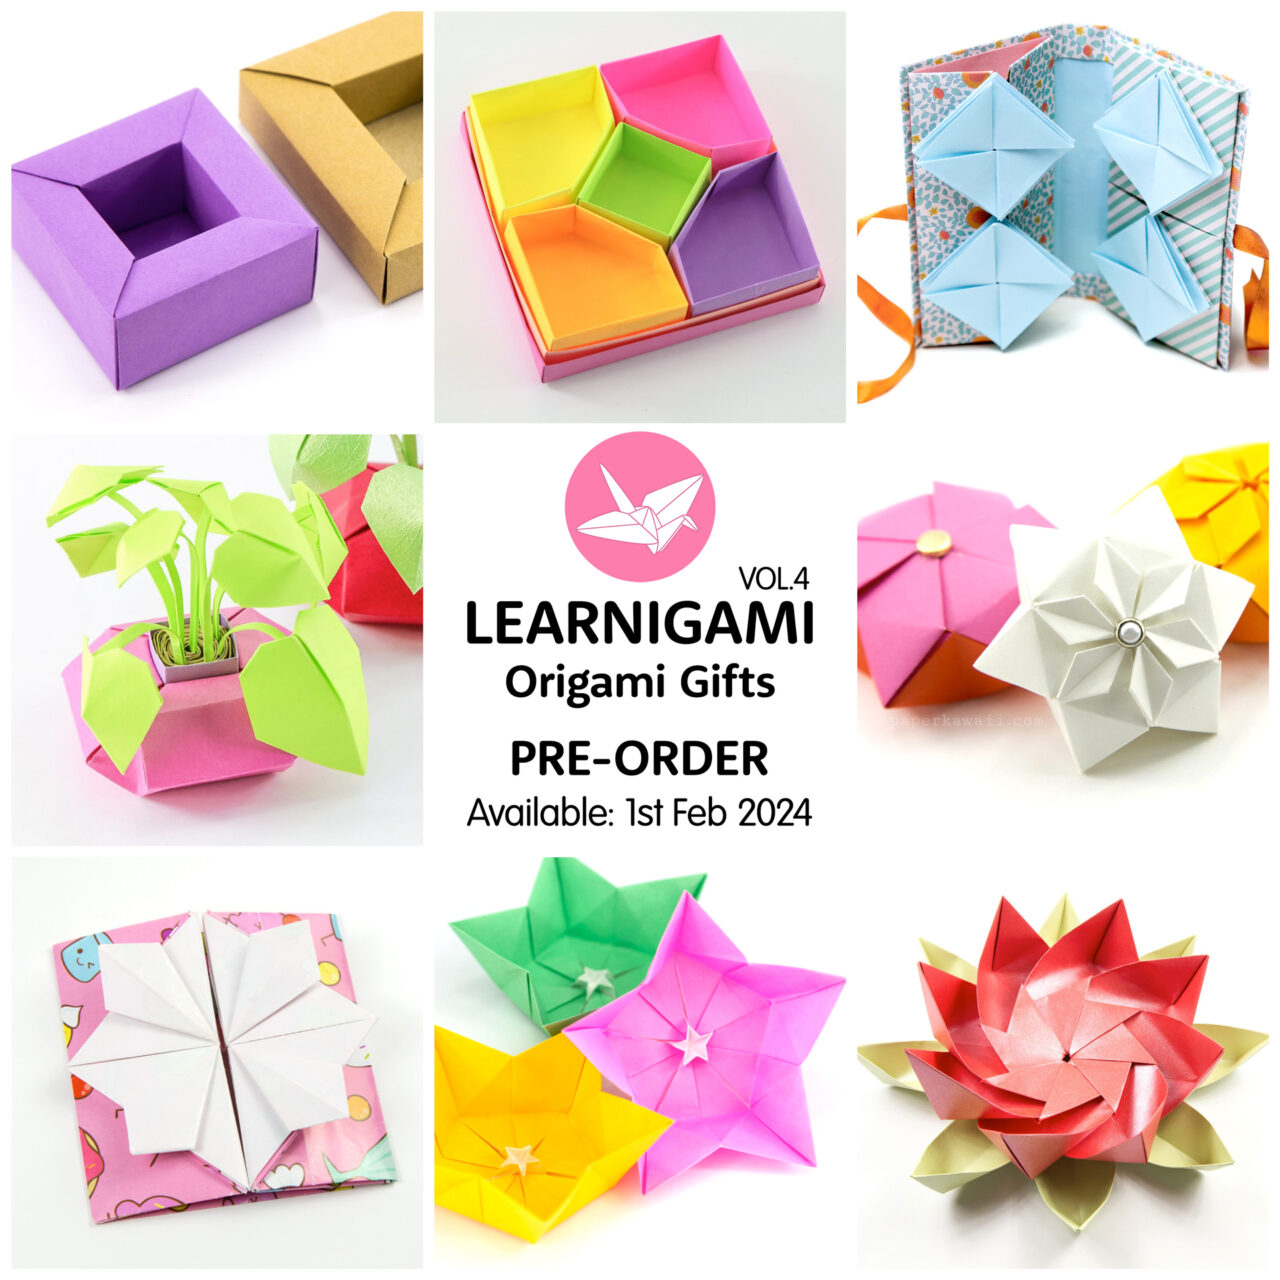 Origami Photo Tutorials - Step By Step Origami Instructions